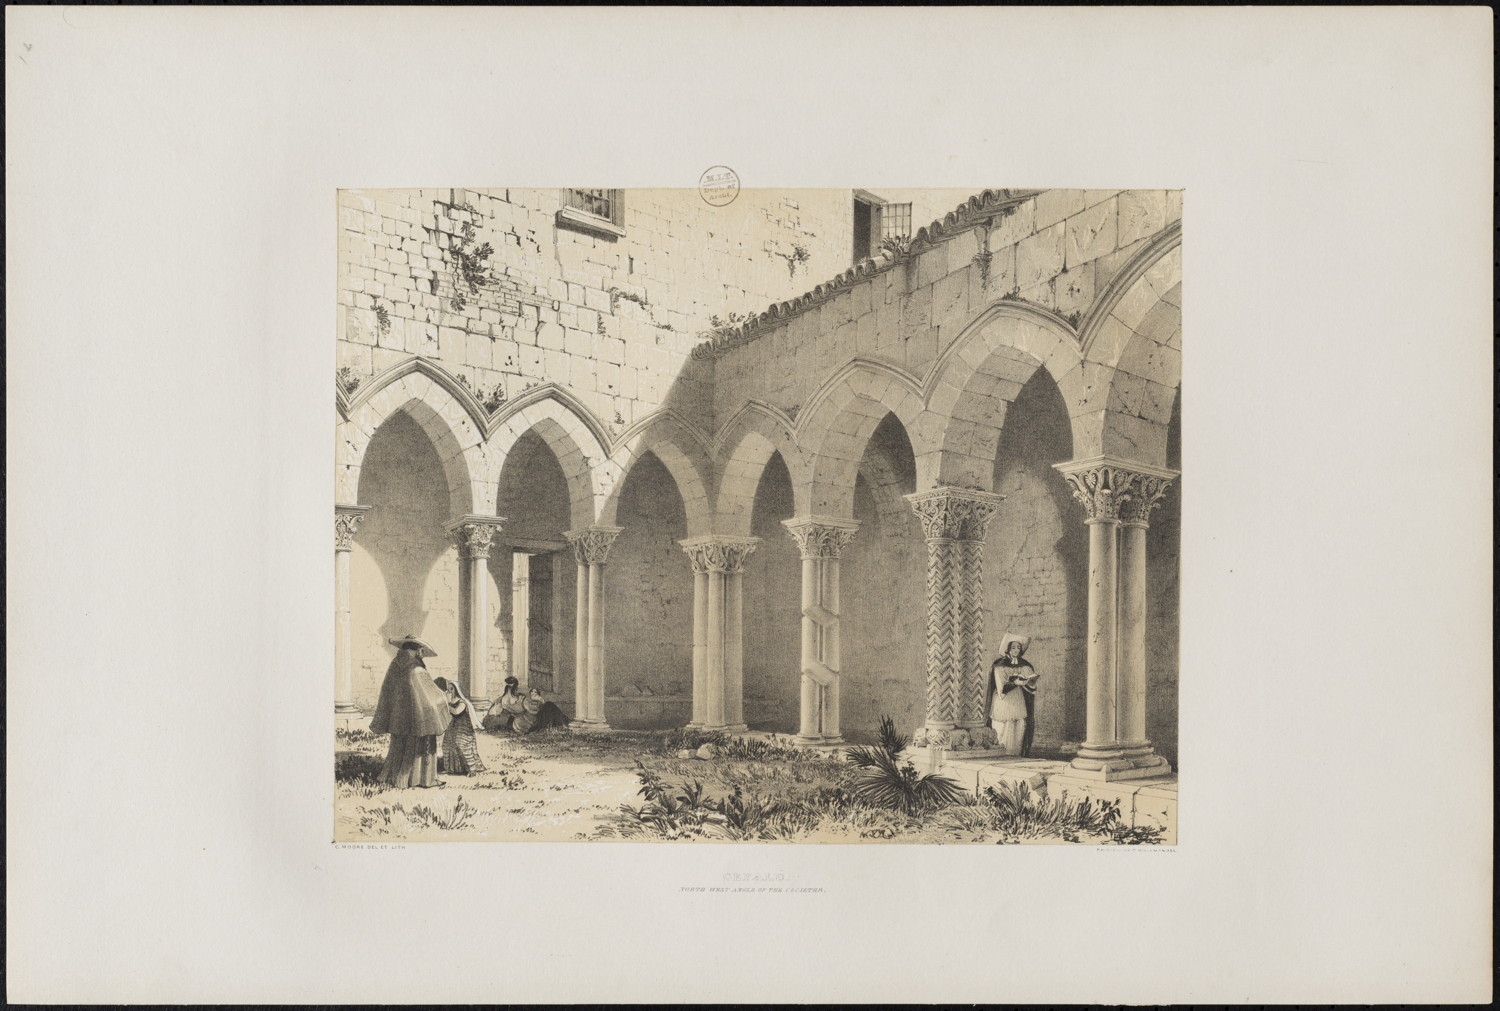 Lithograph of the northwest corner of the cloister